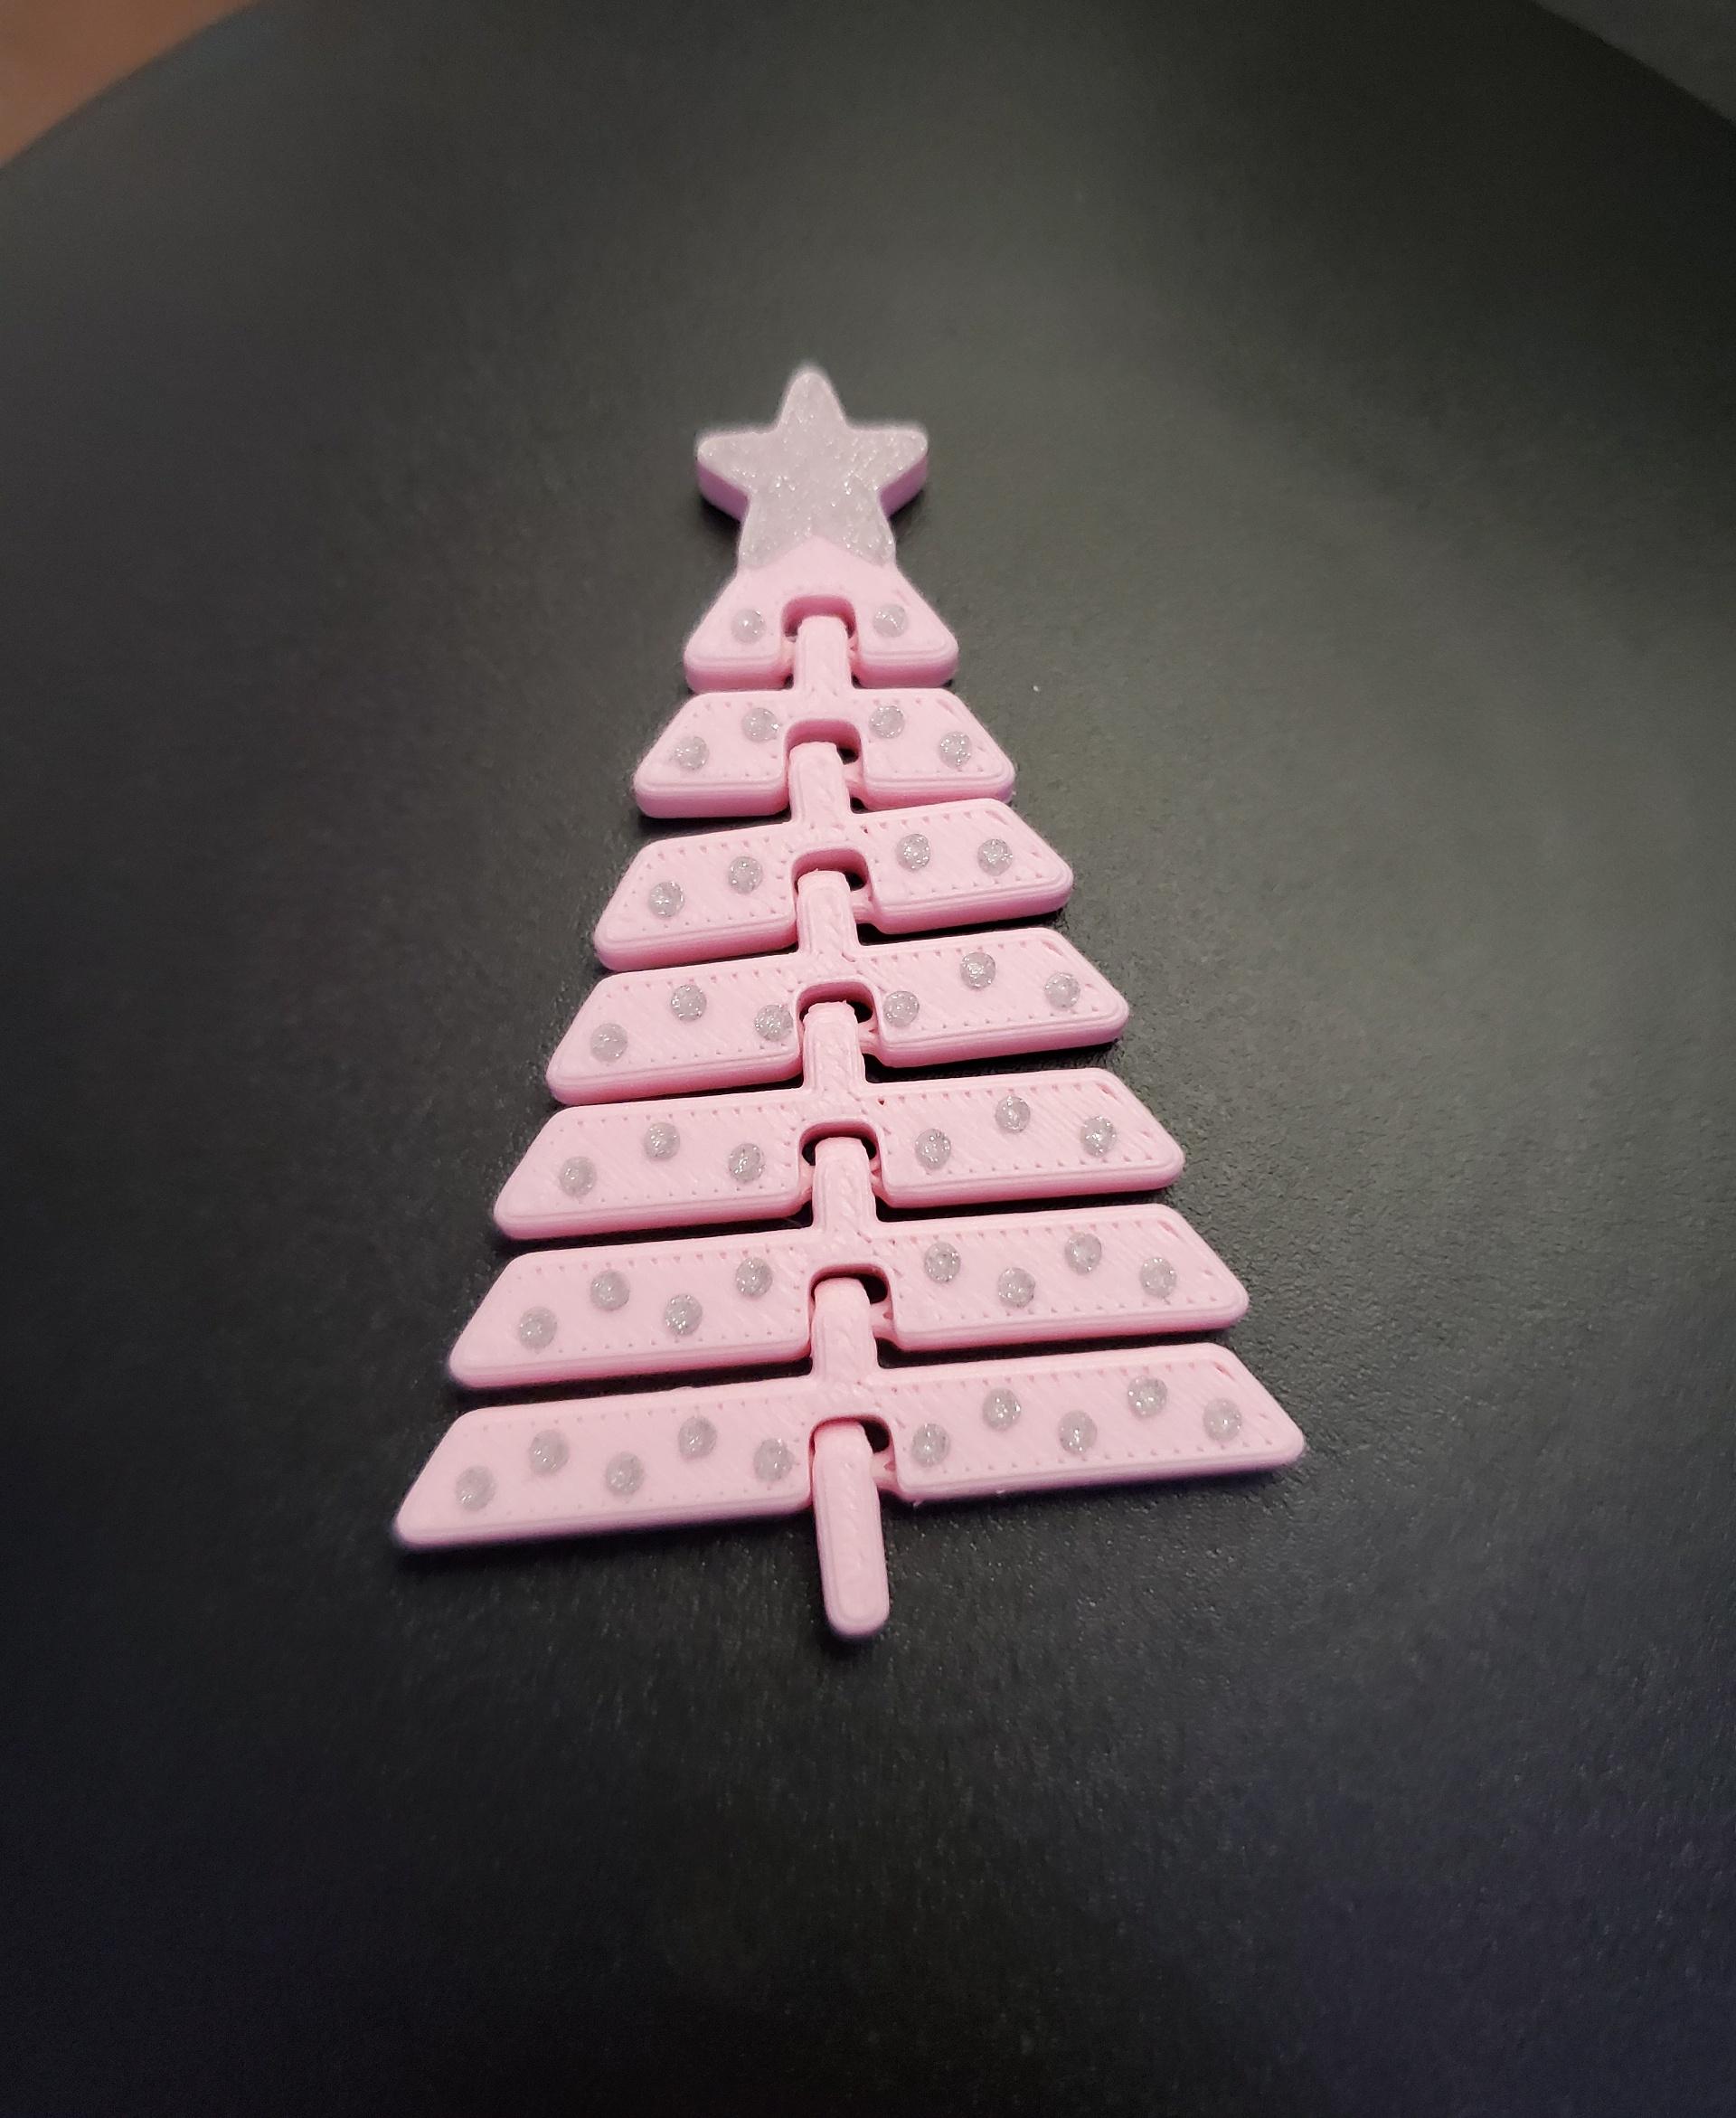 Articulated Christmas Tree with Star and Ornaments - Print in place fidget toys - 3mf - polyterra sakura pink - 3d model